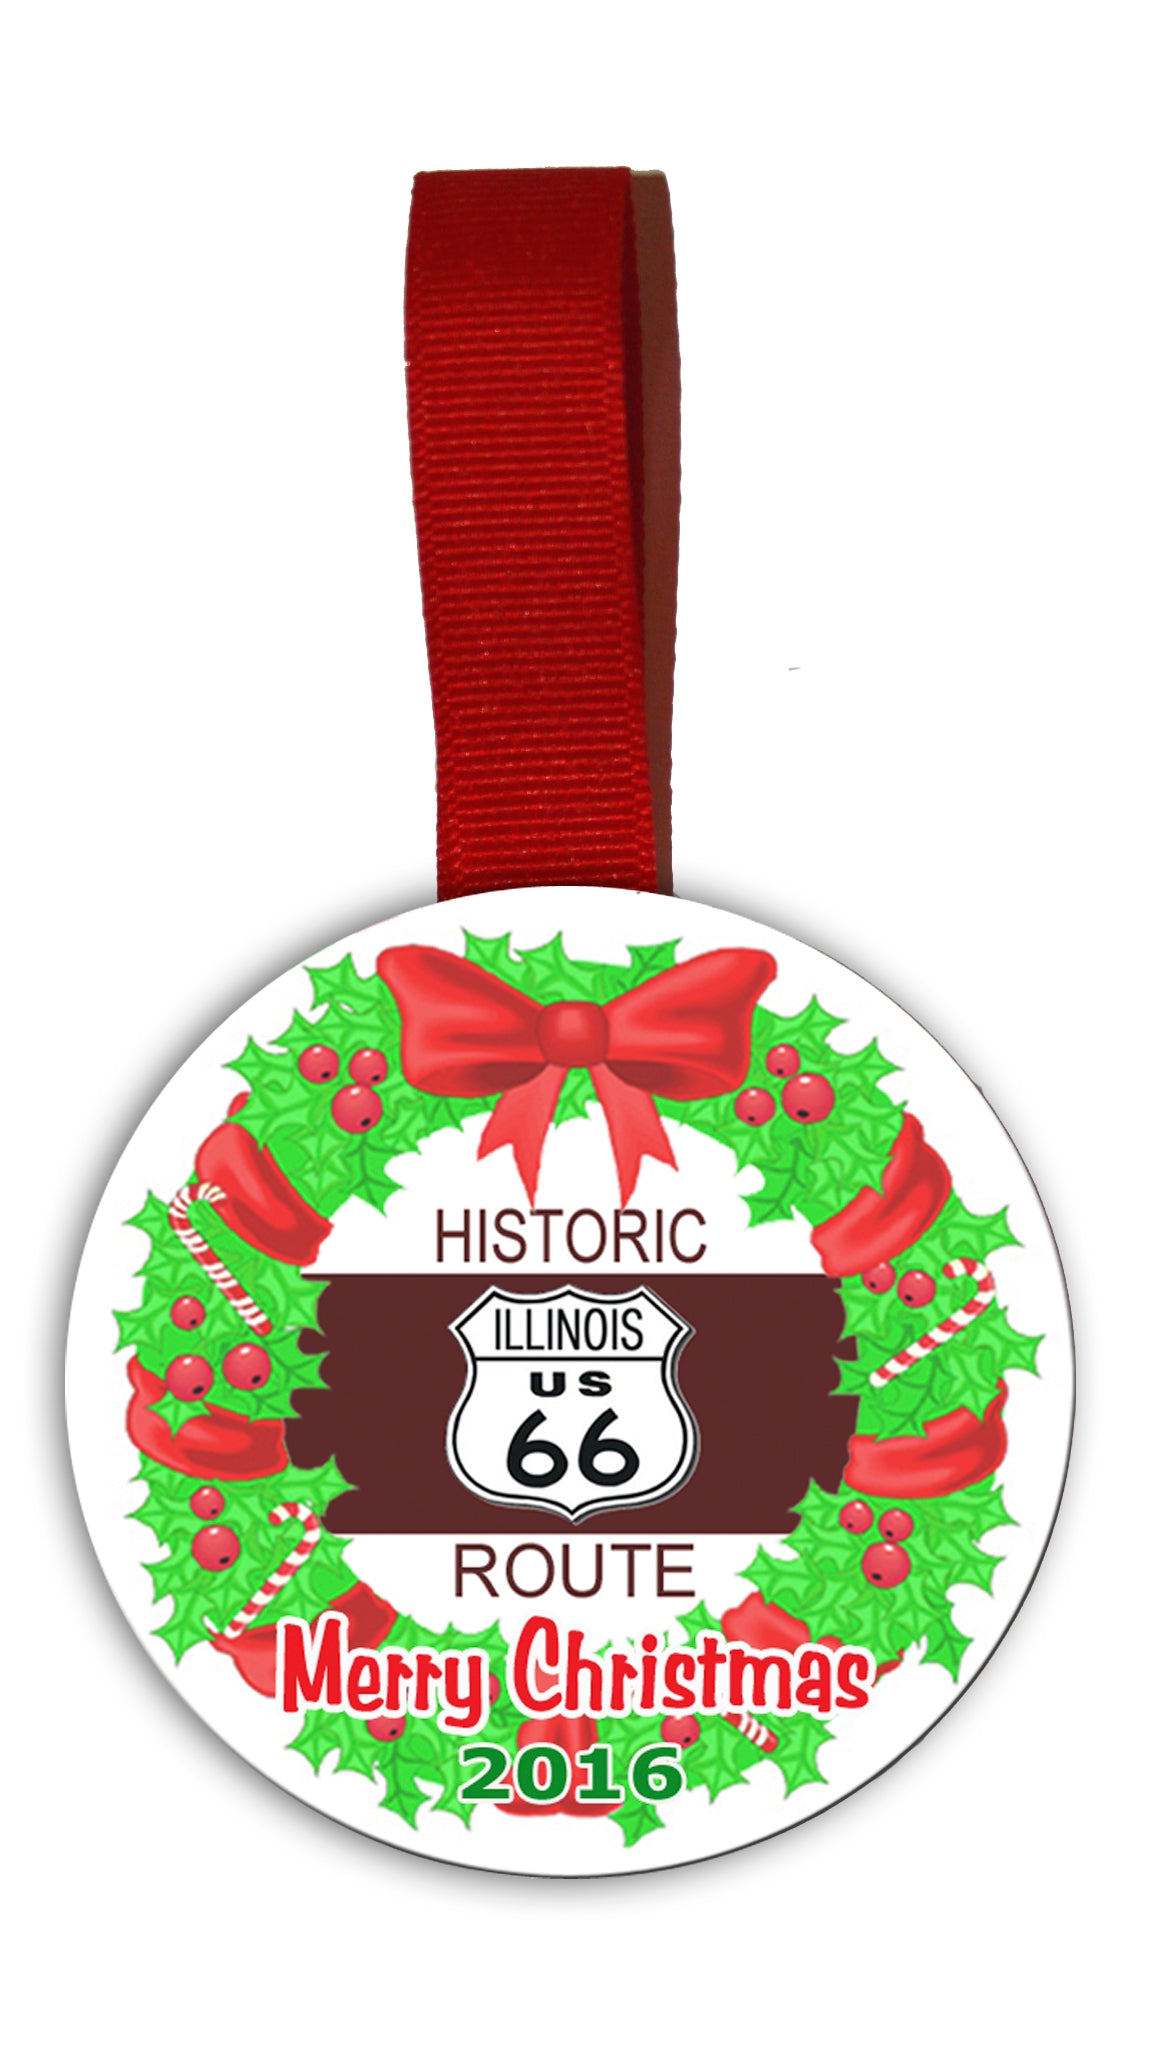 Route 66 Christmas Tree Ornament with Route 66 Graphics Inside of Wreath with 66 Logo and Date